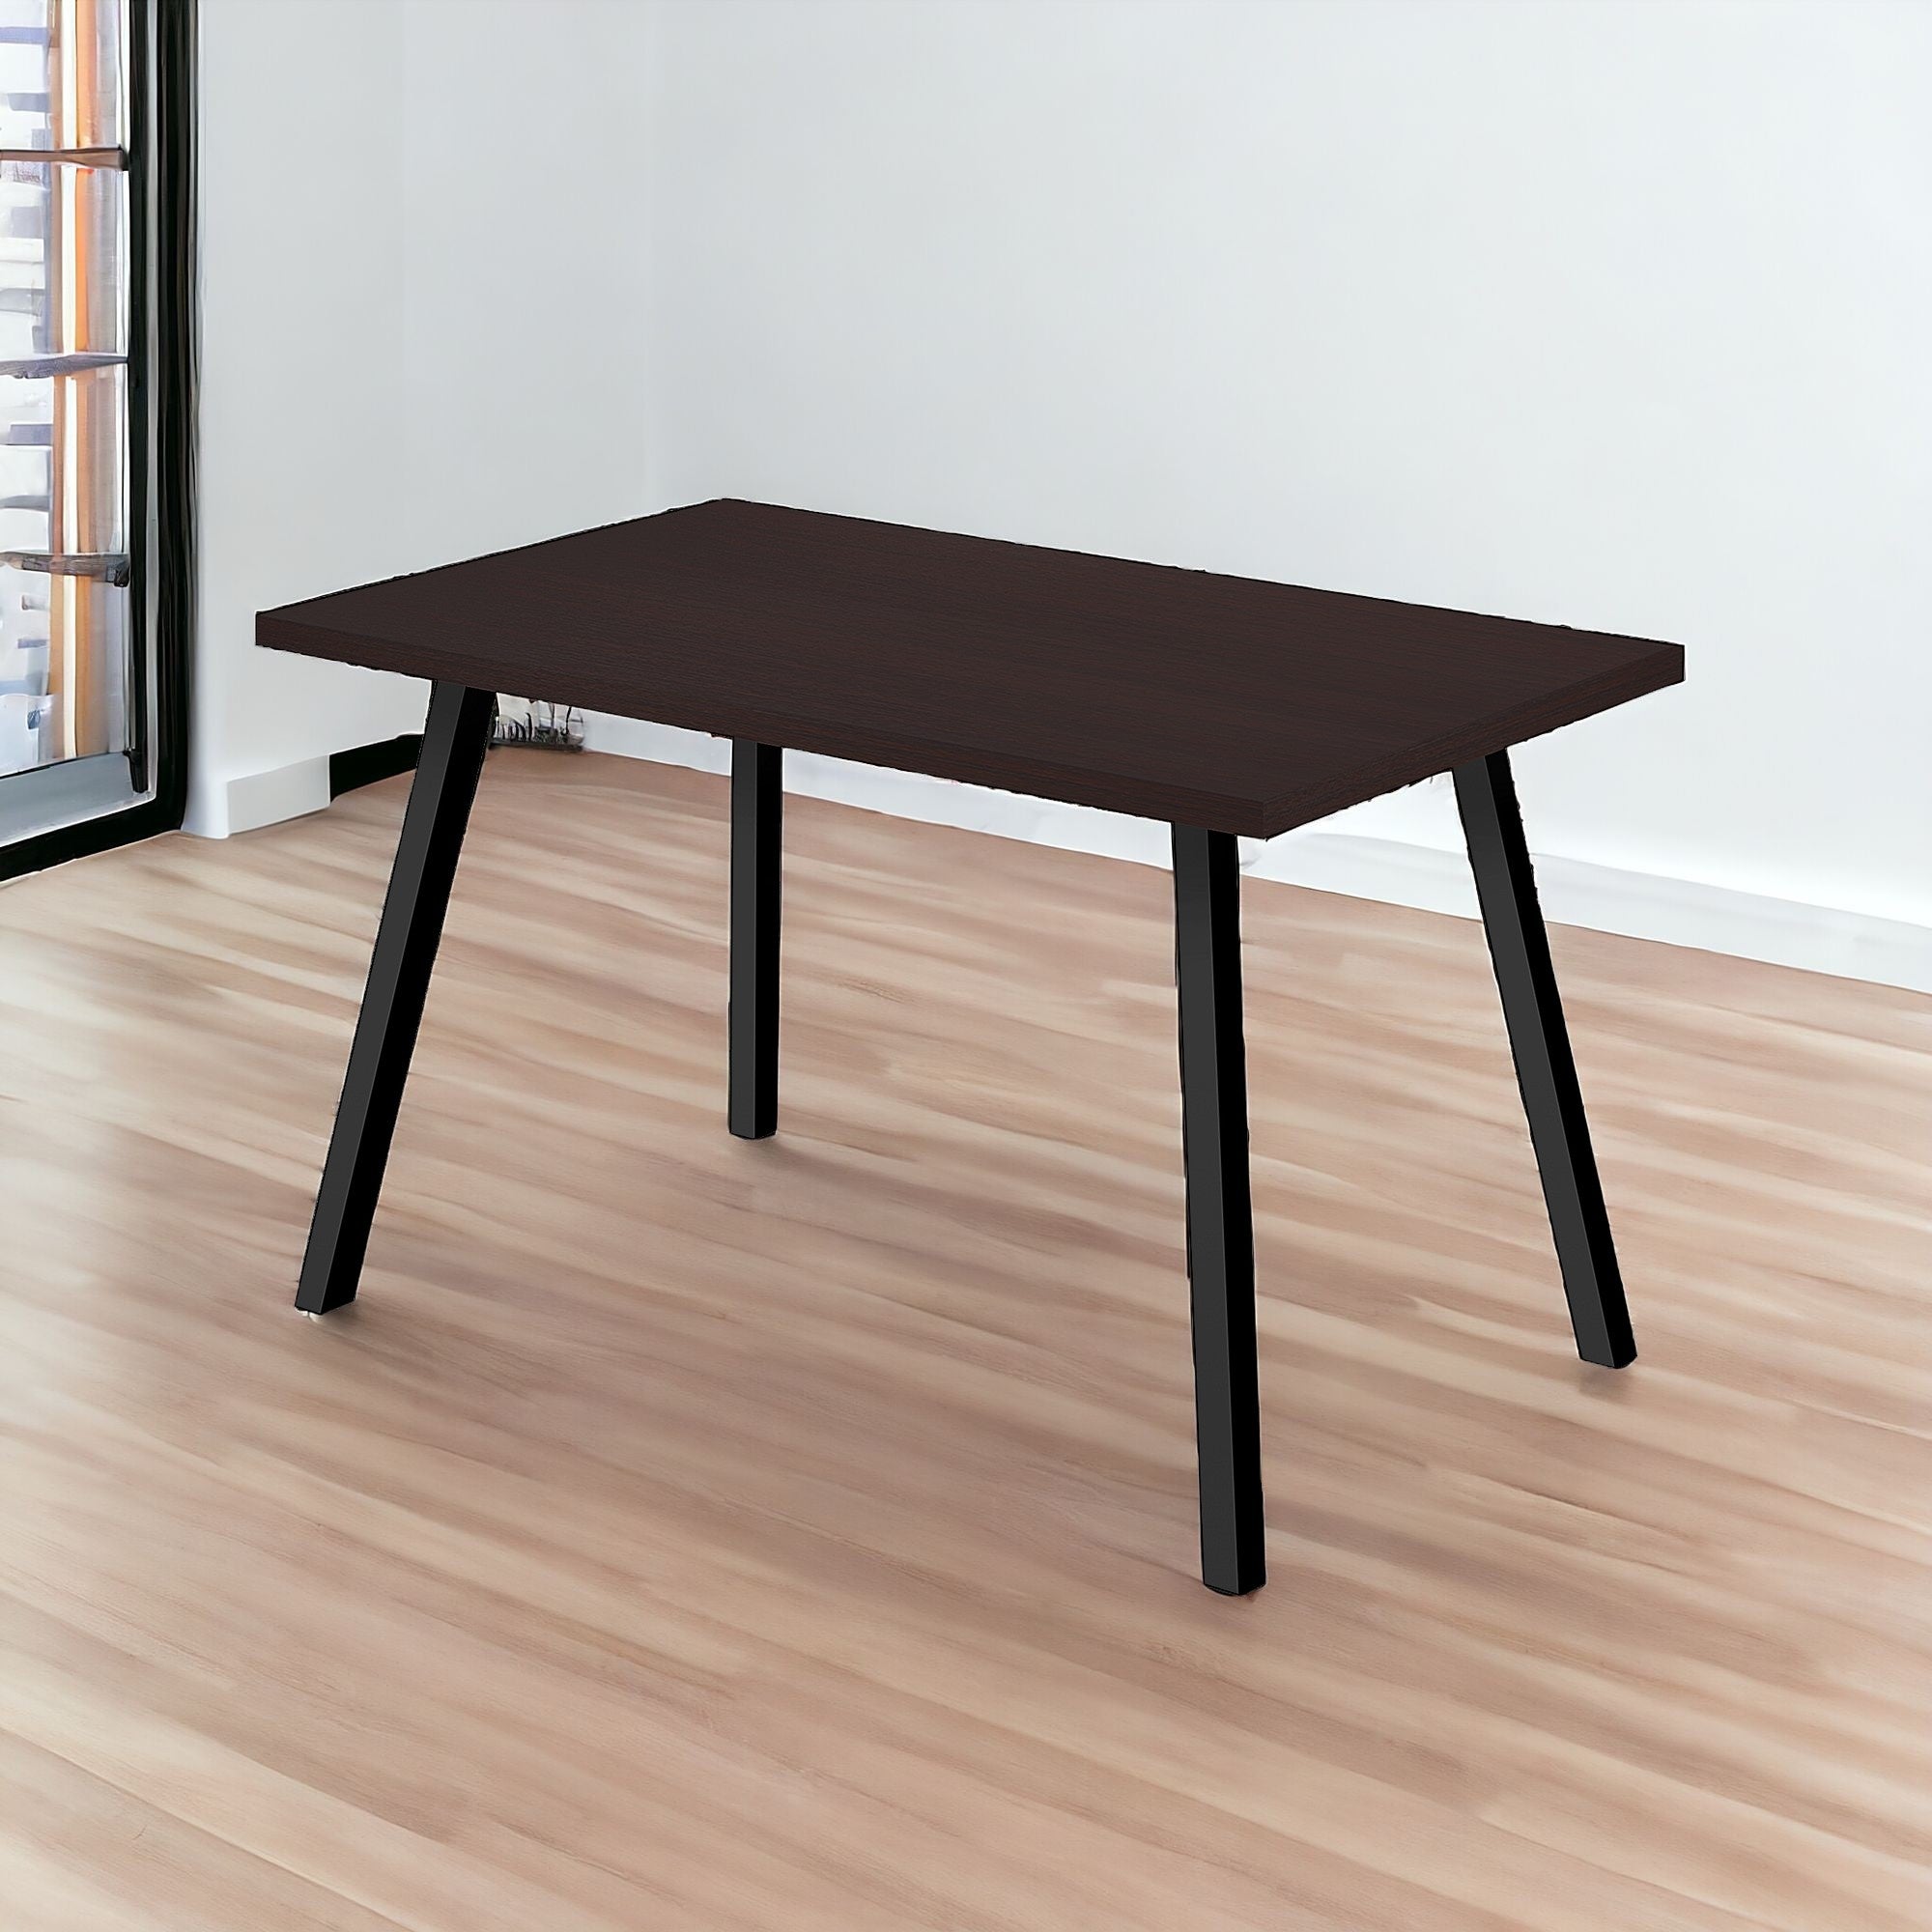 60" Espresso and Black Metal Dining Table